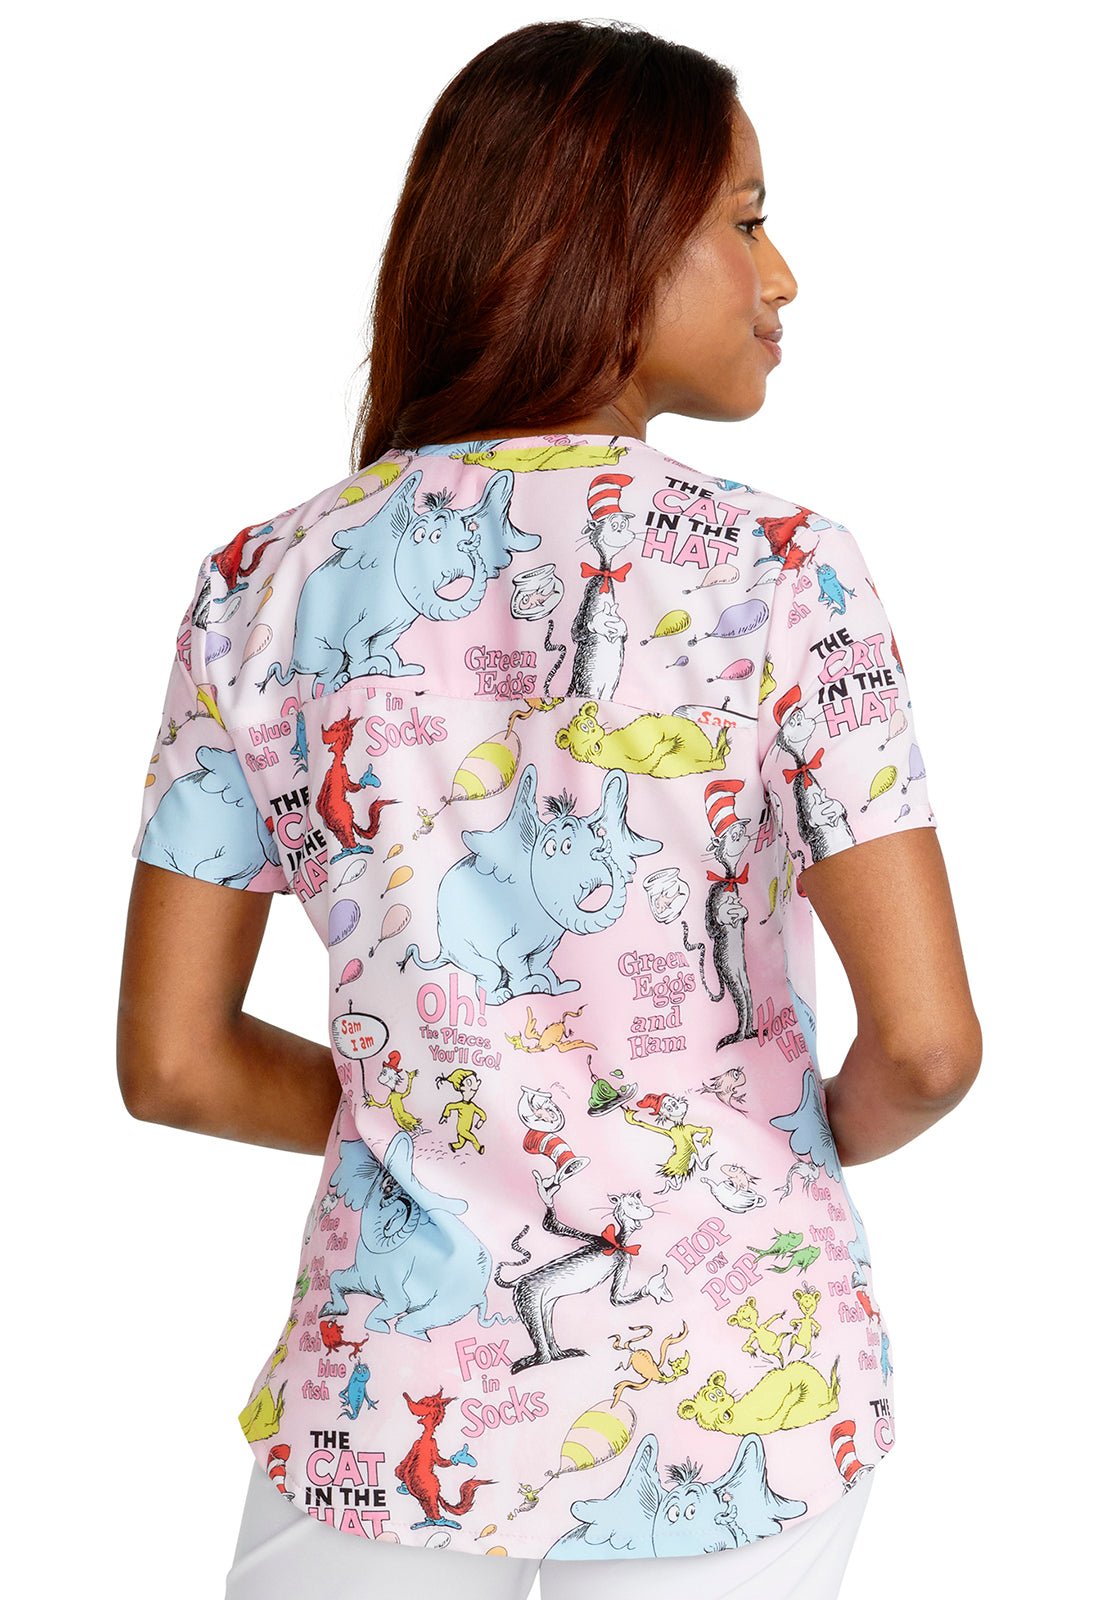 Cat in The Hat Cherokee Tooniforms Dr. Seuss V Neck Scrub Top TF736 SECY - Scrubs Select